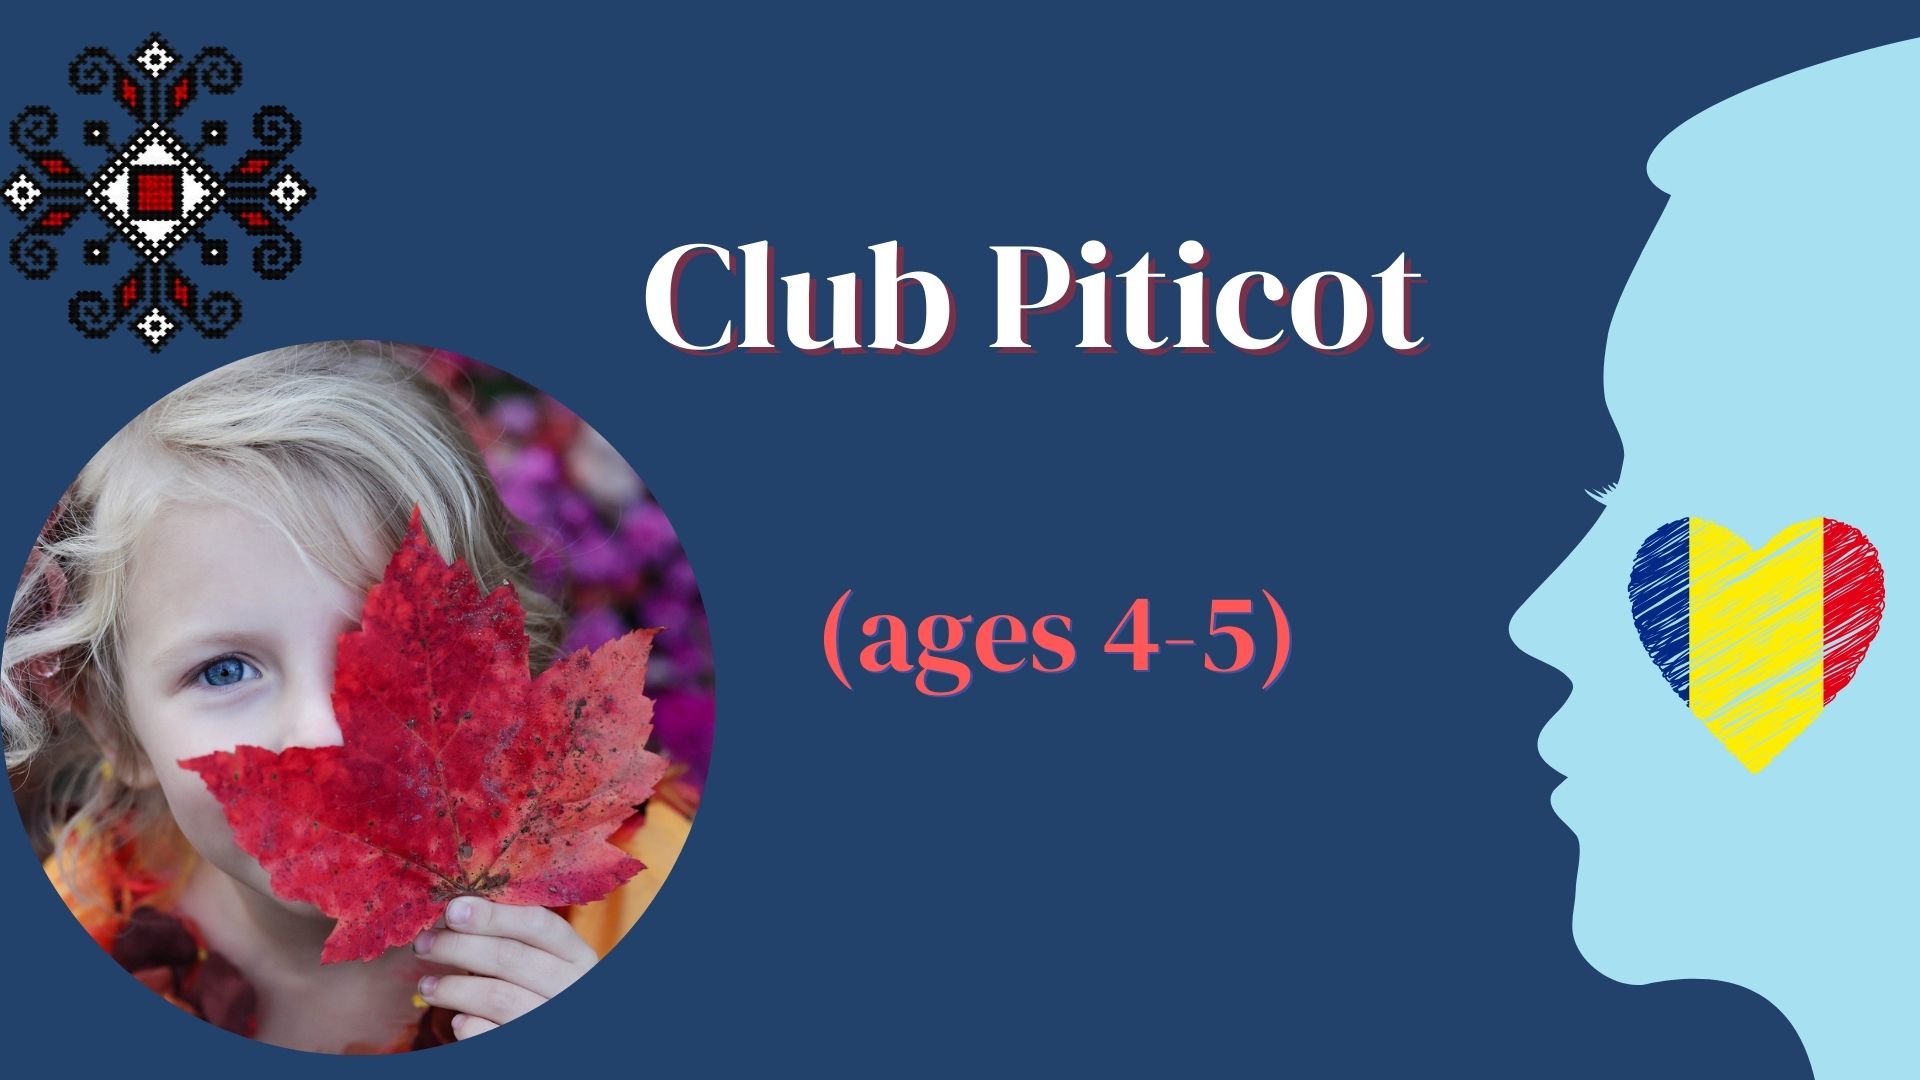 Club Piticot (ages 4-5)